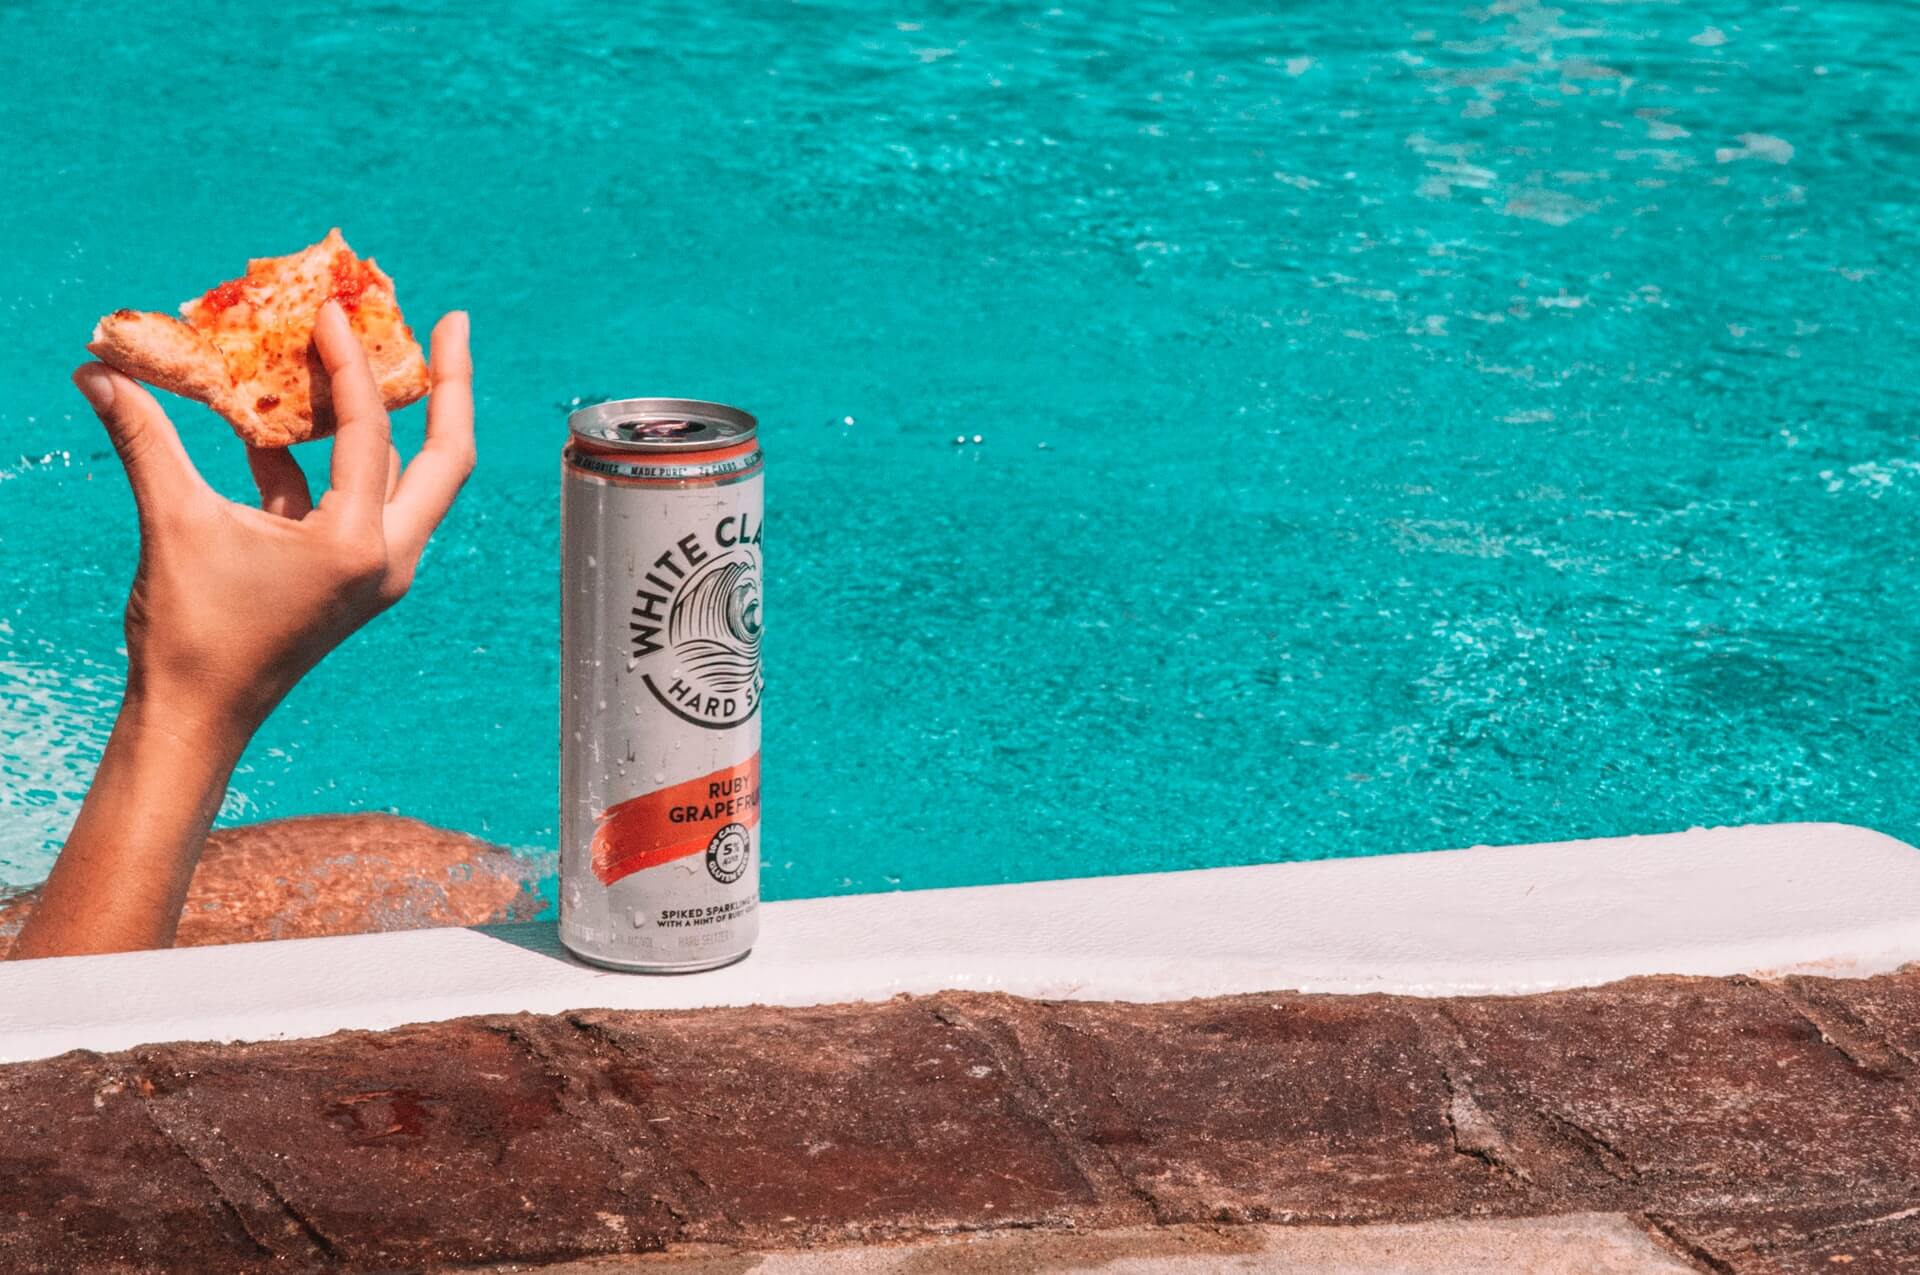 White Claw Ruby Grapefruit and pizza poolside